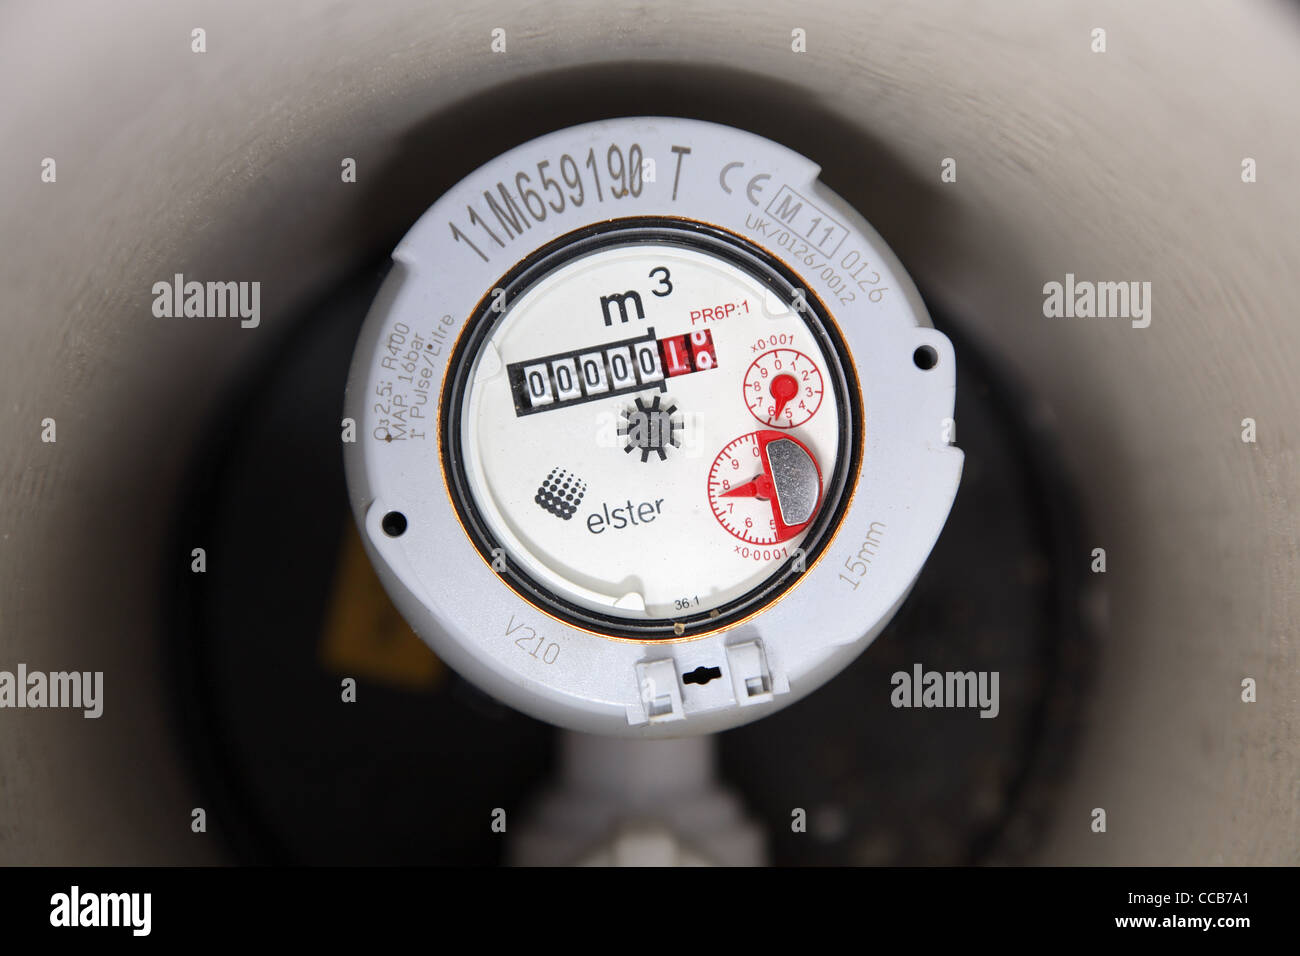 Domestic water meter in the UK. Stock Photo